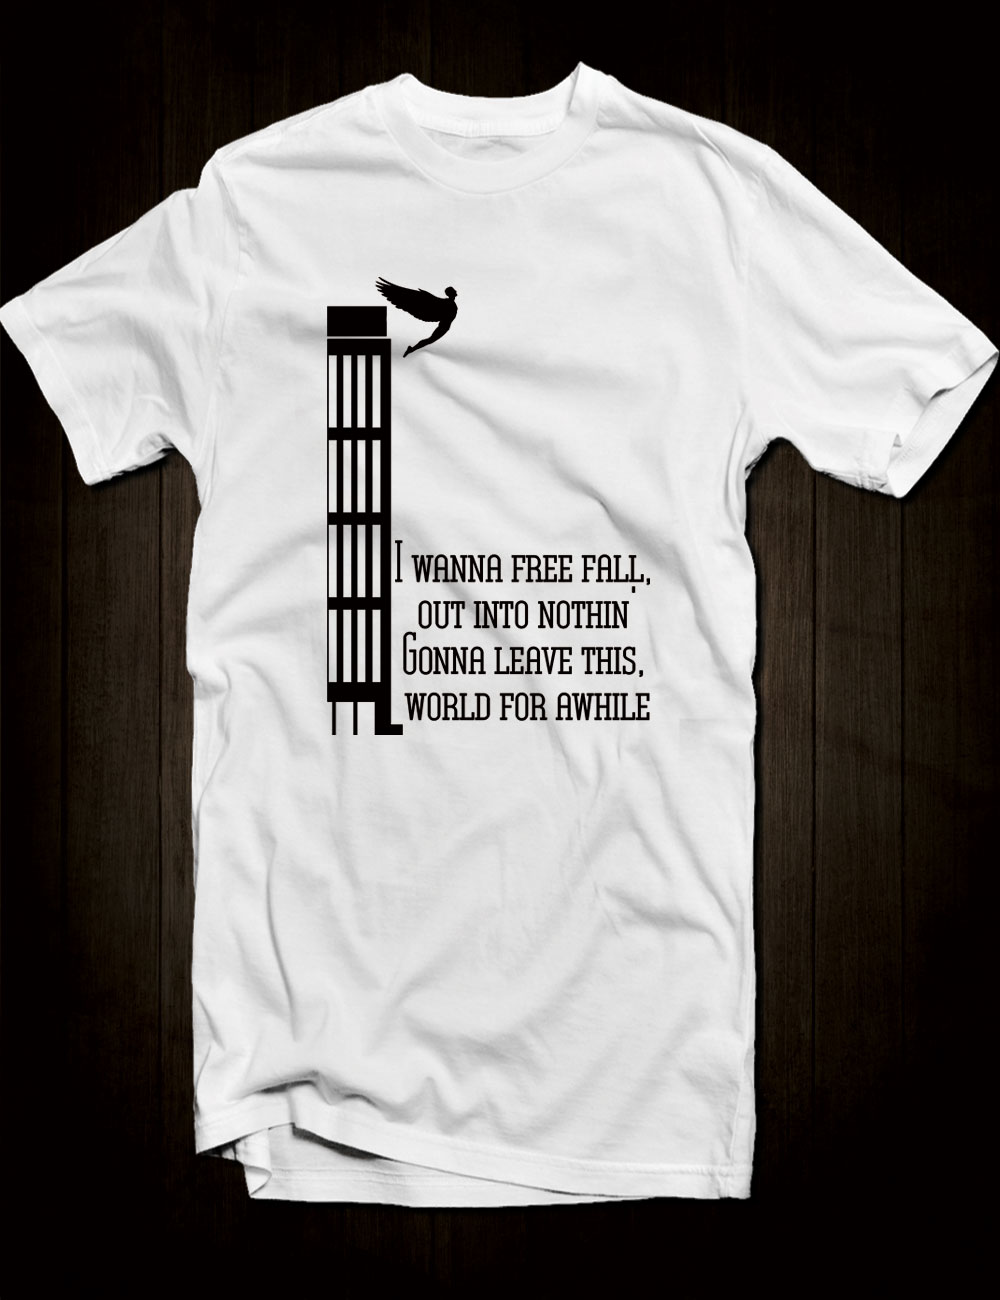 Free Fallin' T-Shirt - Hellwood Outfitters